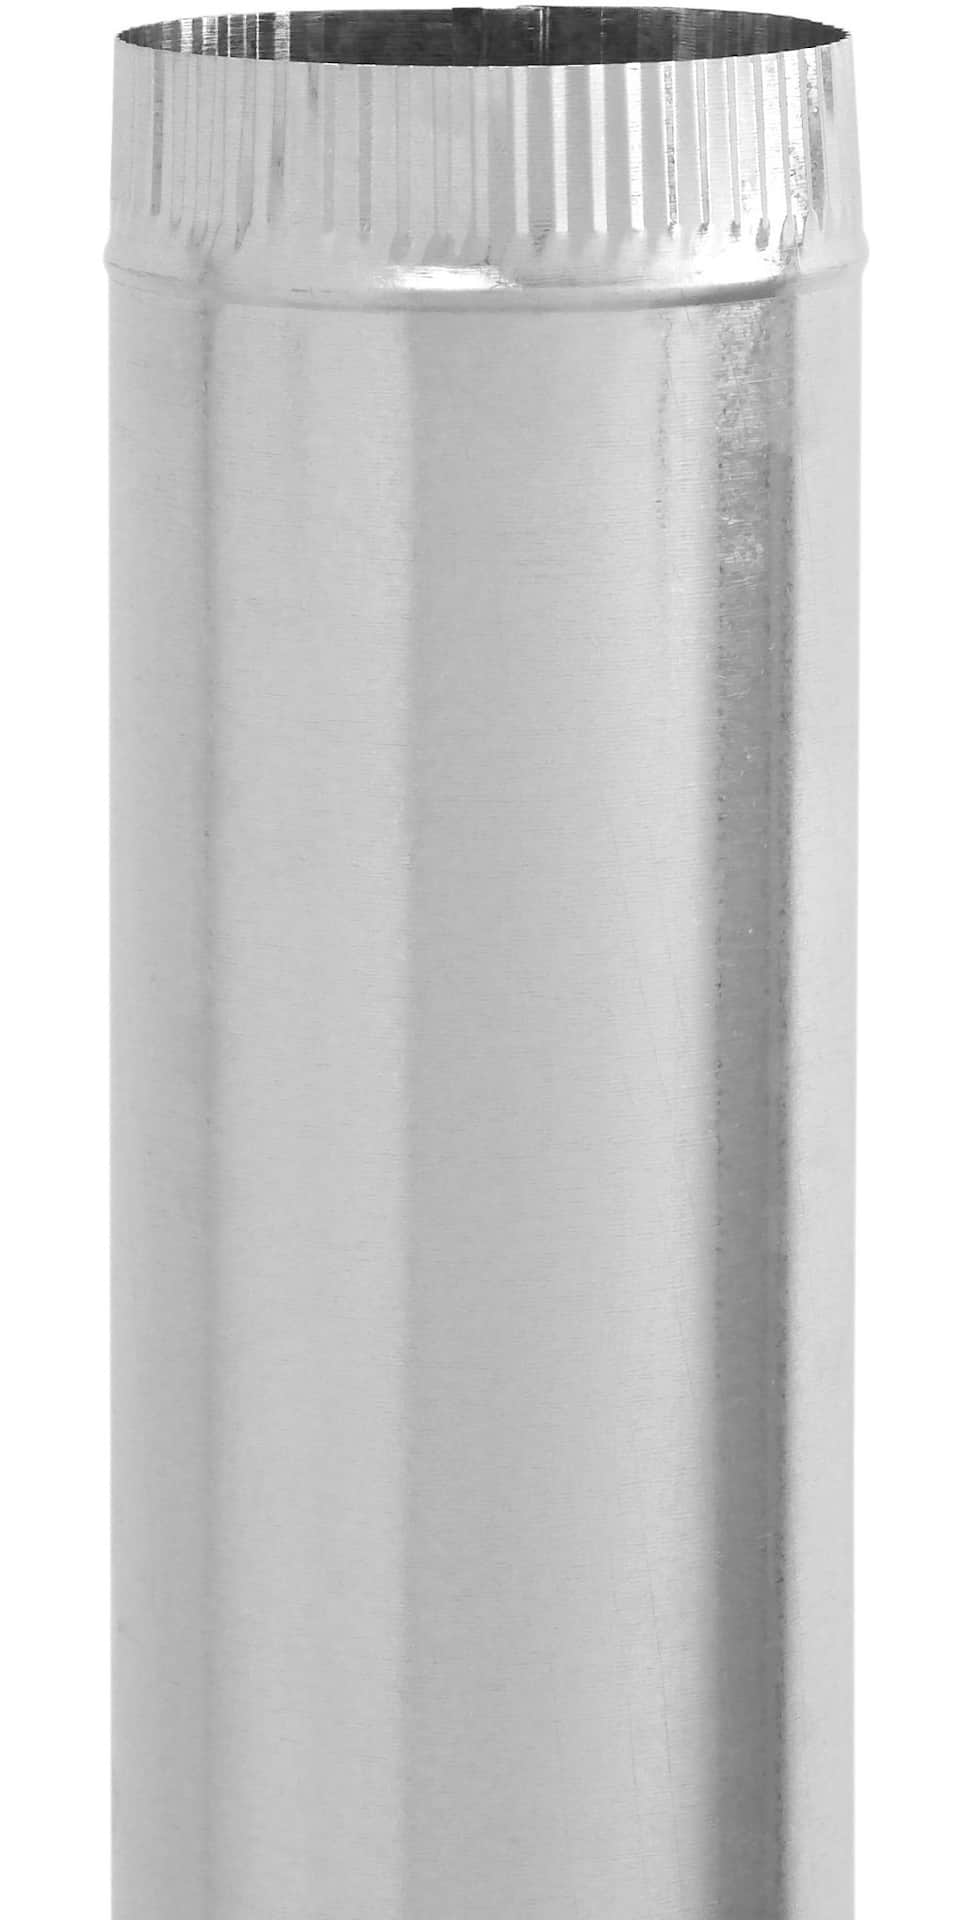 Reliable Fasteners Round Tube - Steel - 1-in dia x 4-ft L